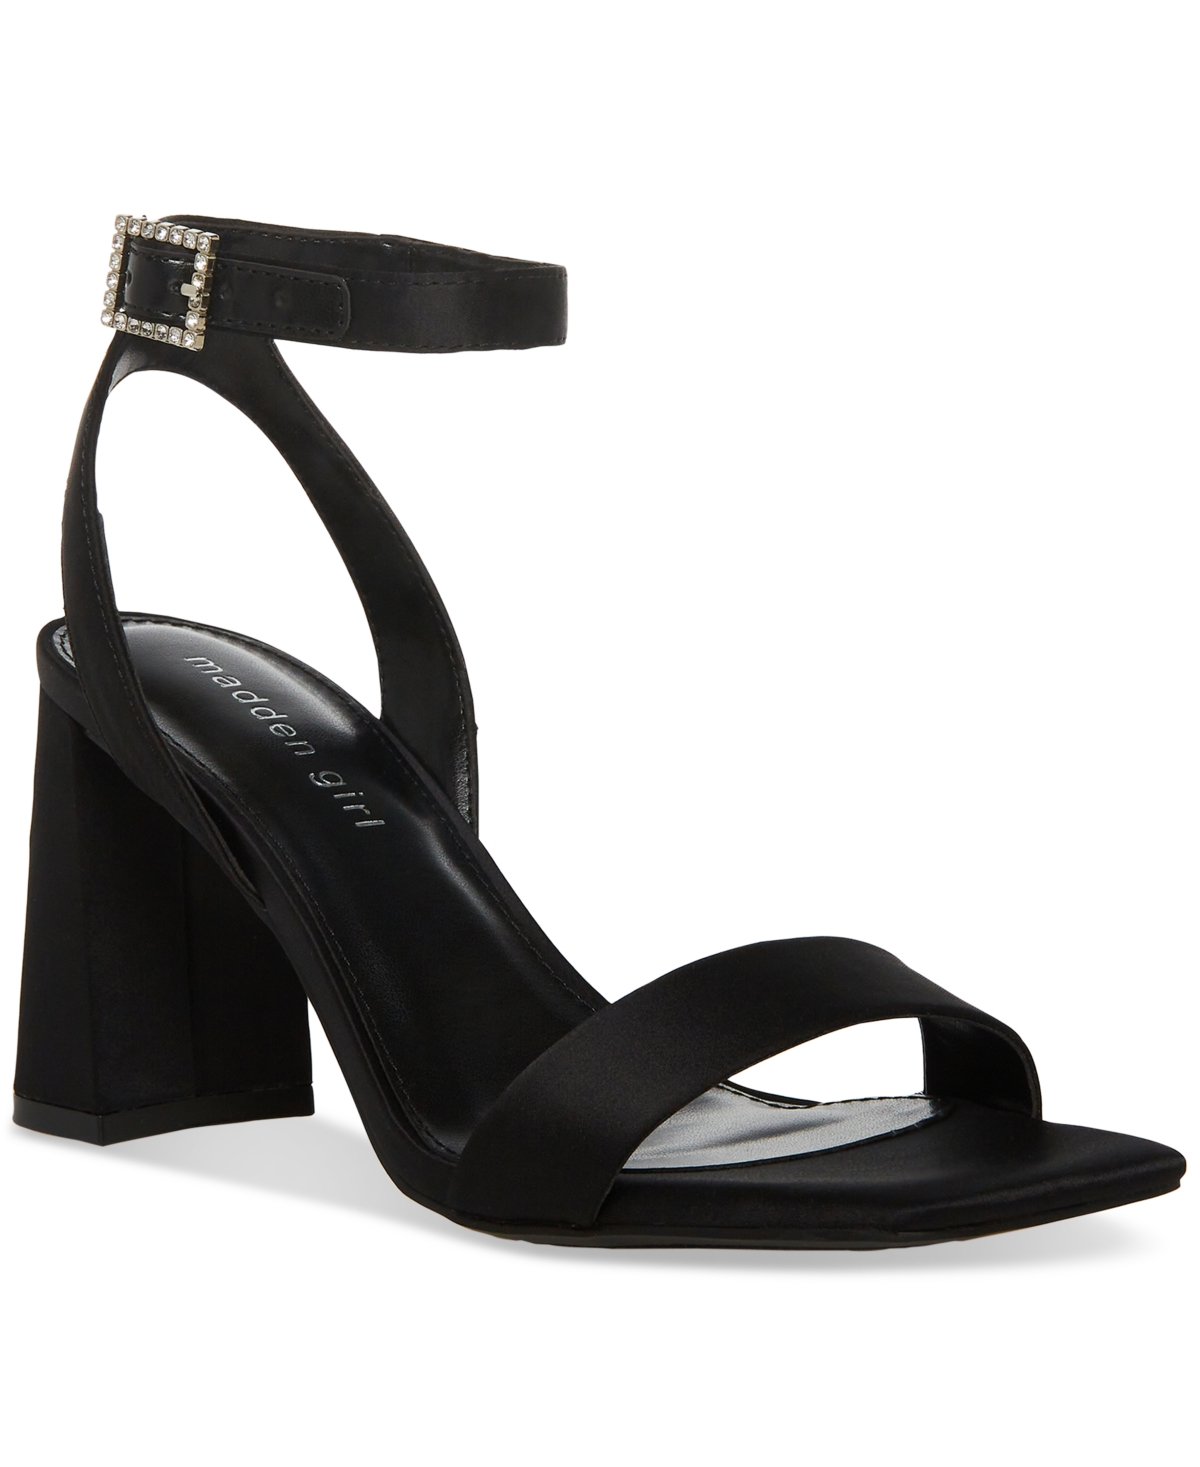 MADDEN GIRL WINNI ANKLE-STRAP TWO-PIECE DRESS SANDALS